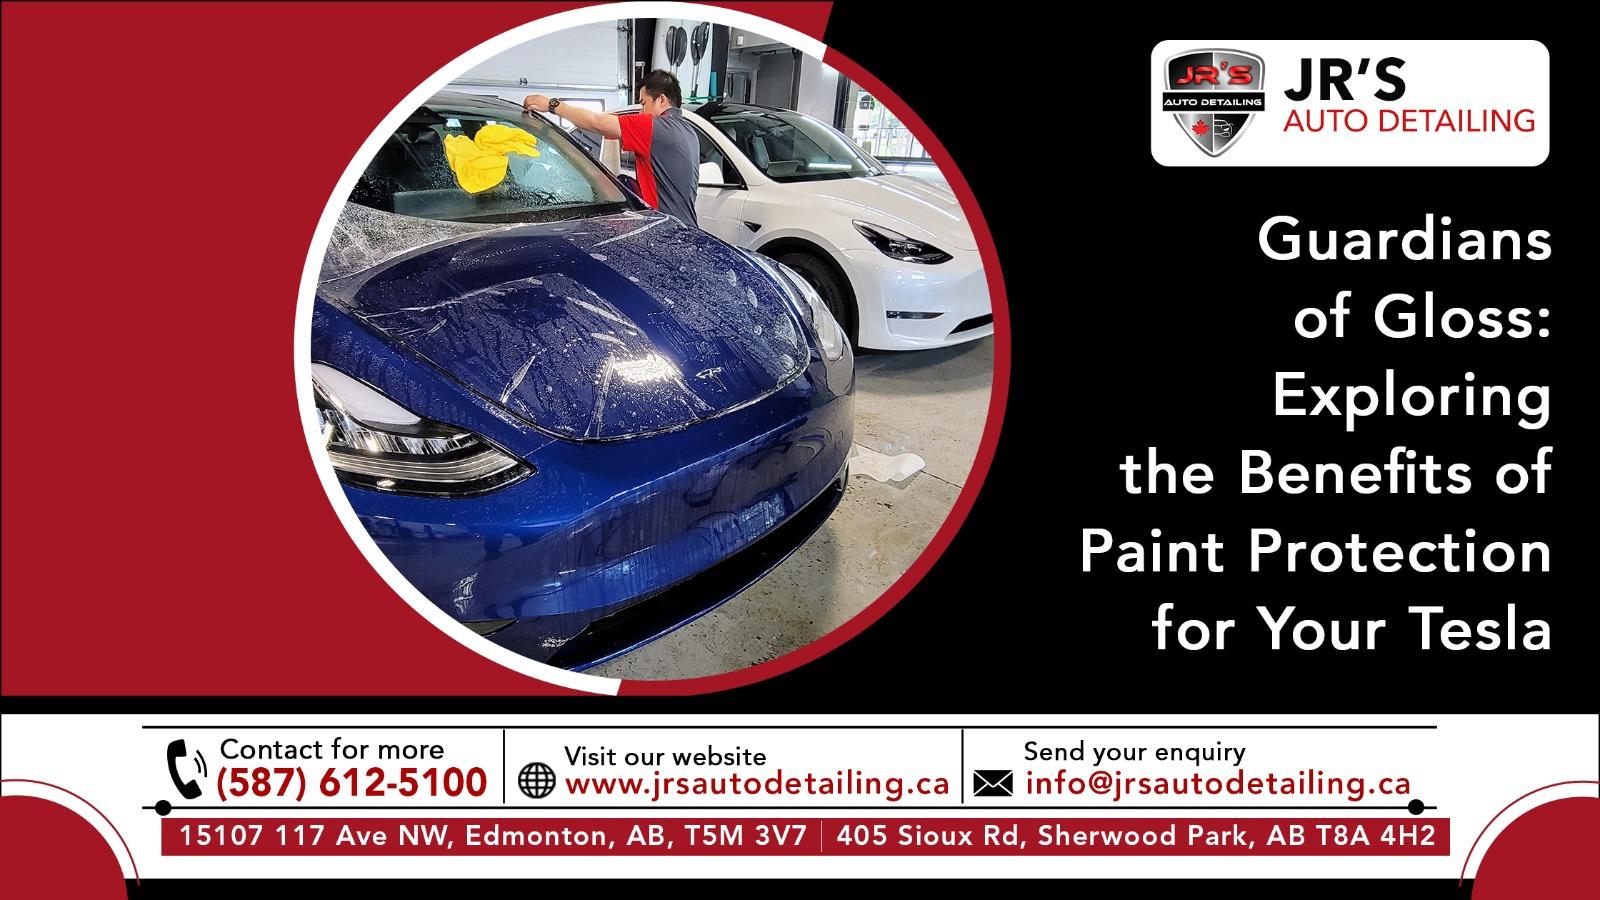 Guardians of Gloss Exploring the Benefits of Paint Protection for Your Tesla